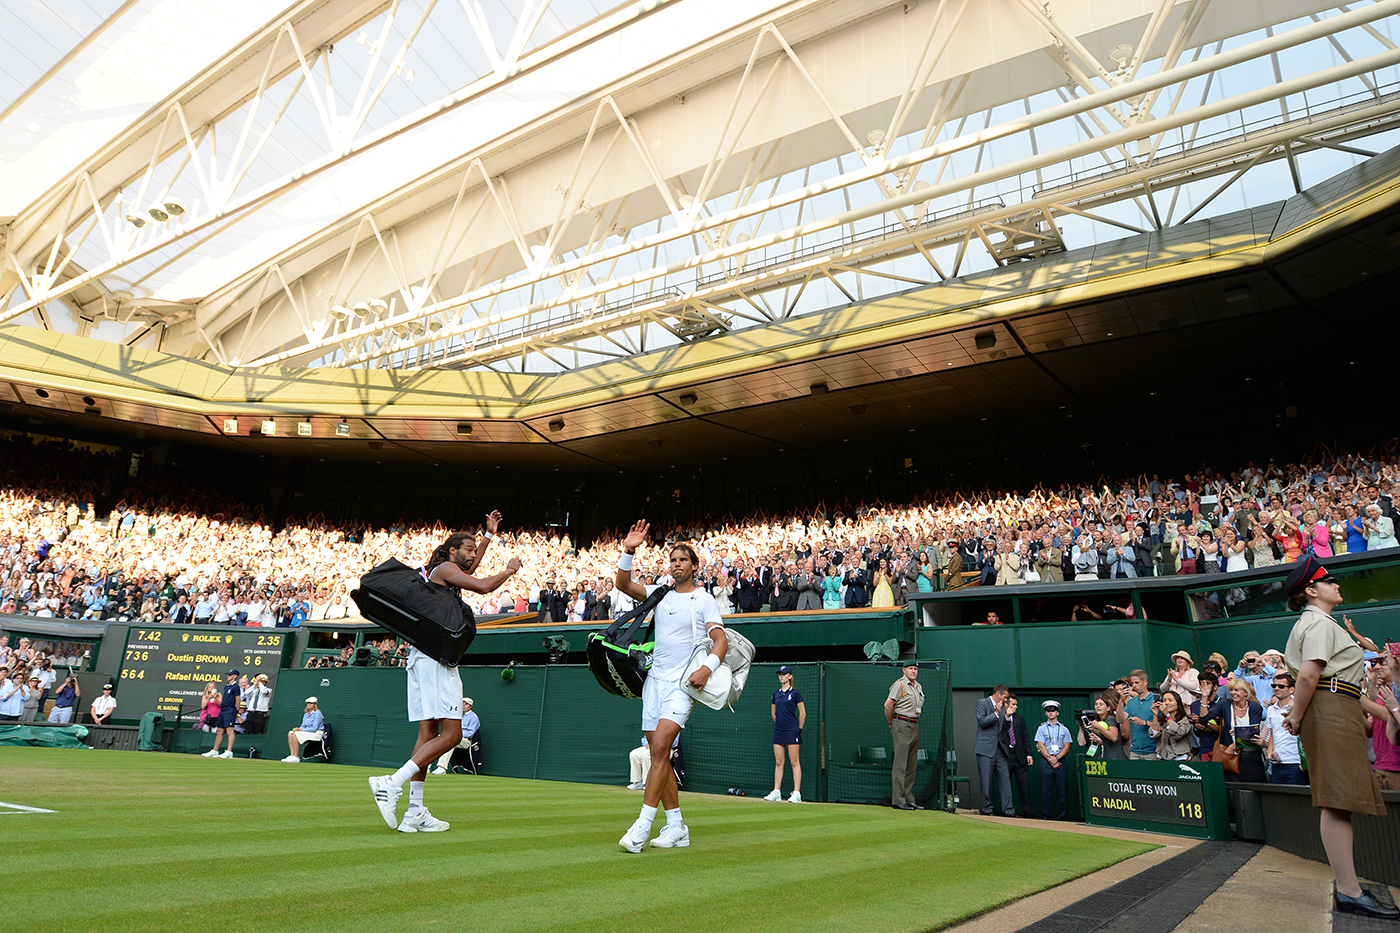 Upset On Centre Court Brown Defeats Nadal The Championships Wimbledon Official Site By Ibm 1685